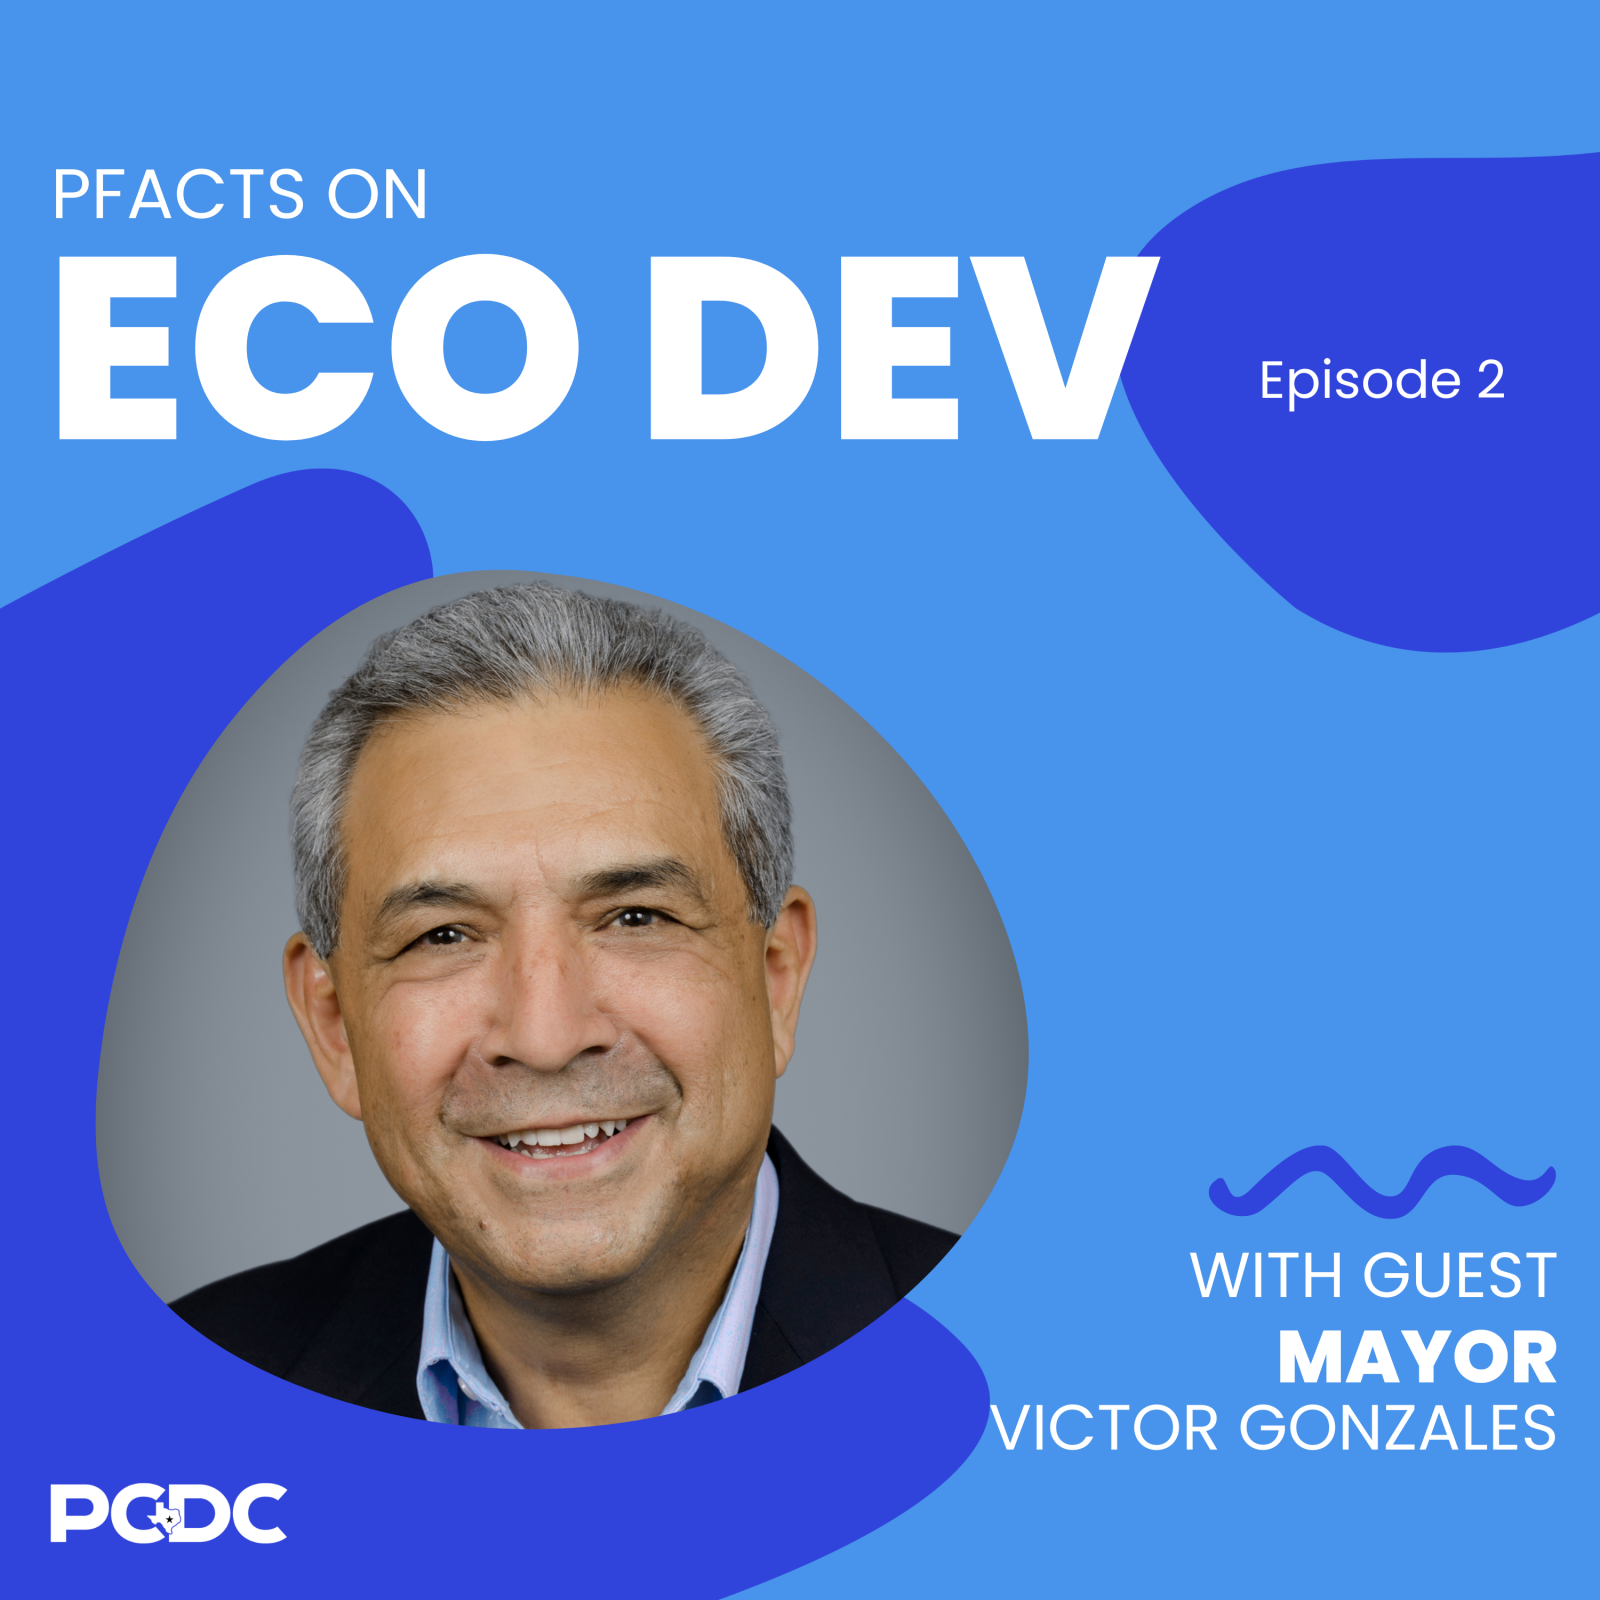 PFACTS ON ECO DEV PODCAST EPISODE 2 Main Photo